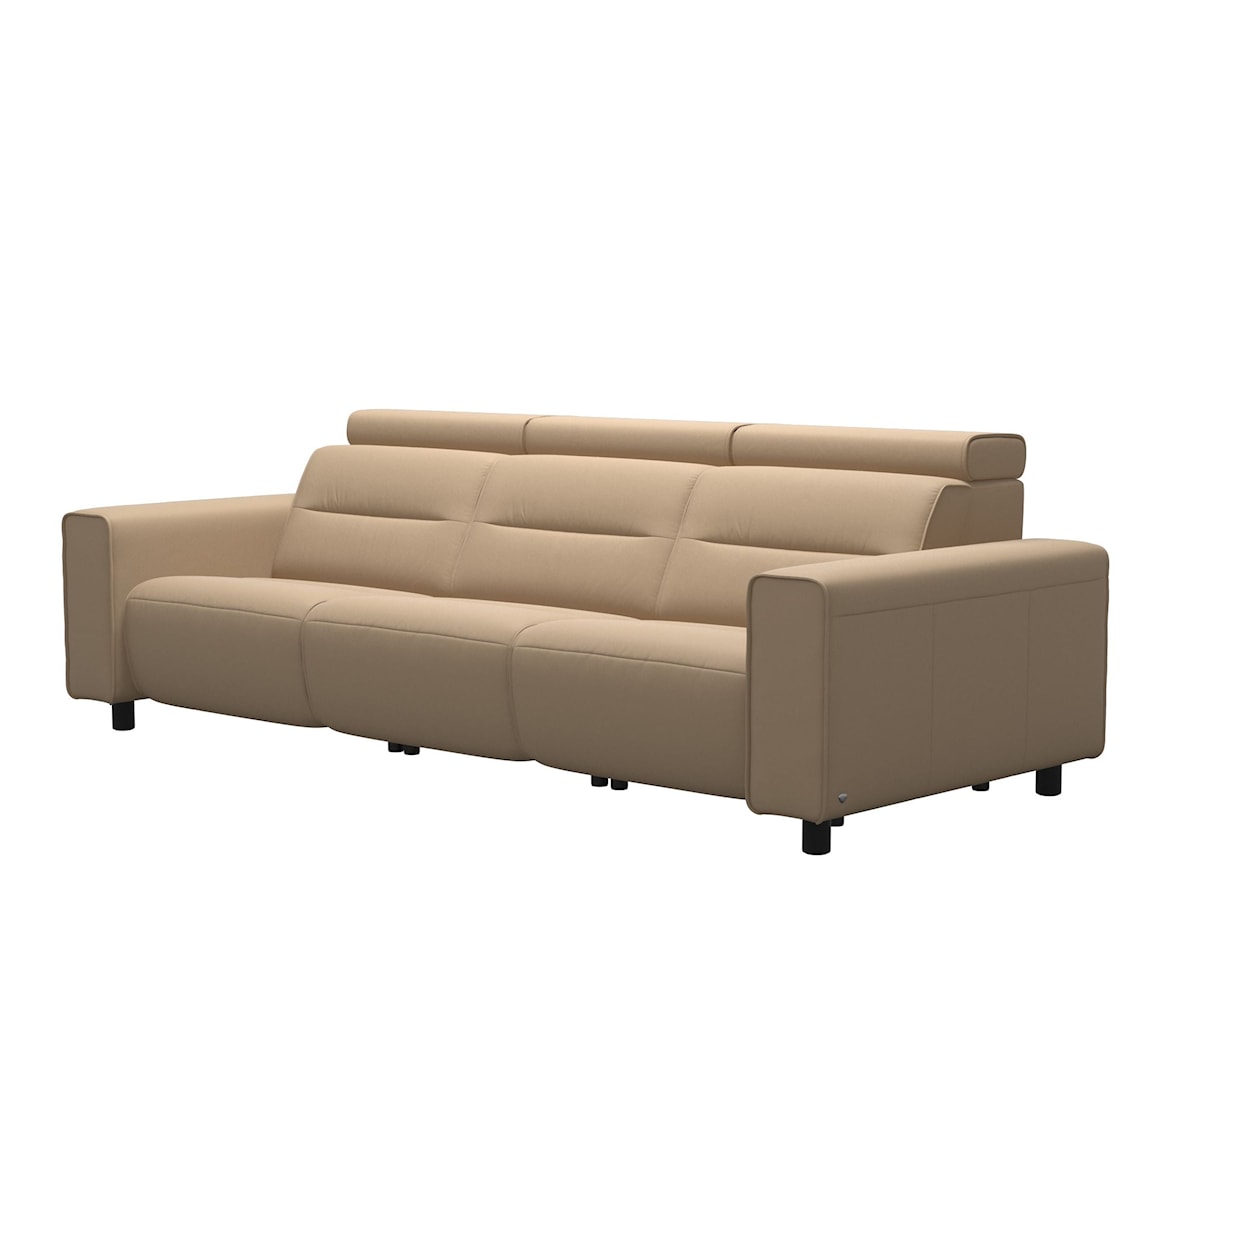 Stressless by Ekornes Emily Power Reclining Sofa with Wide Arms